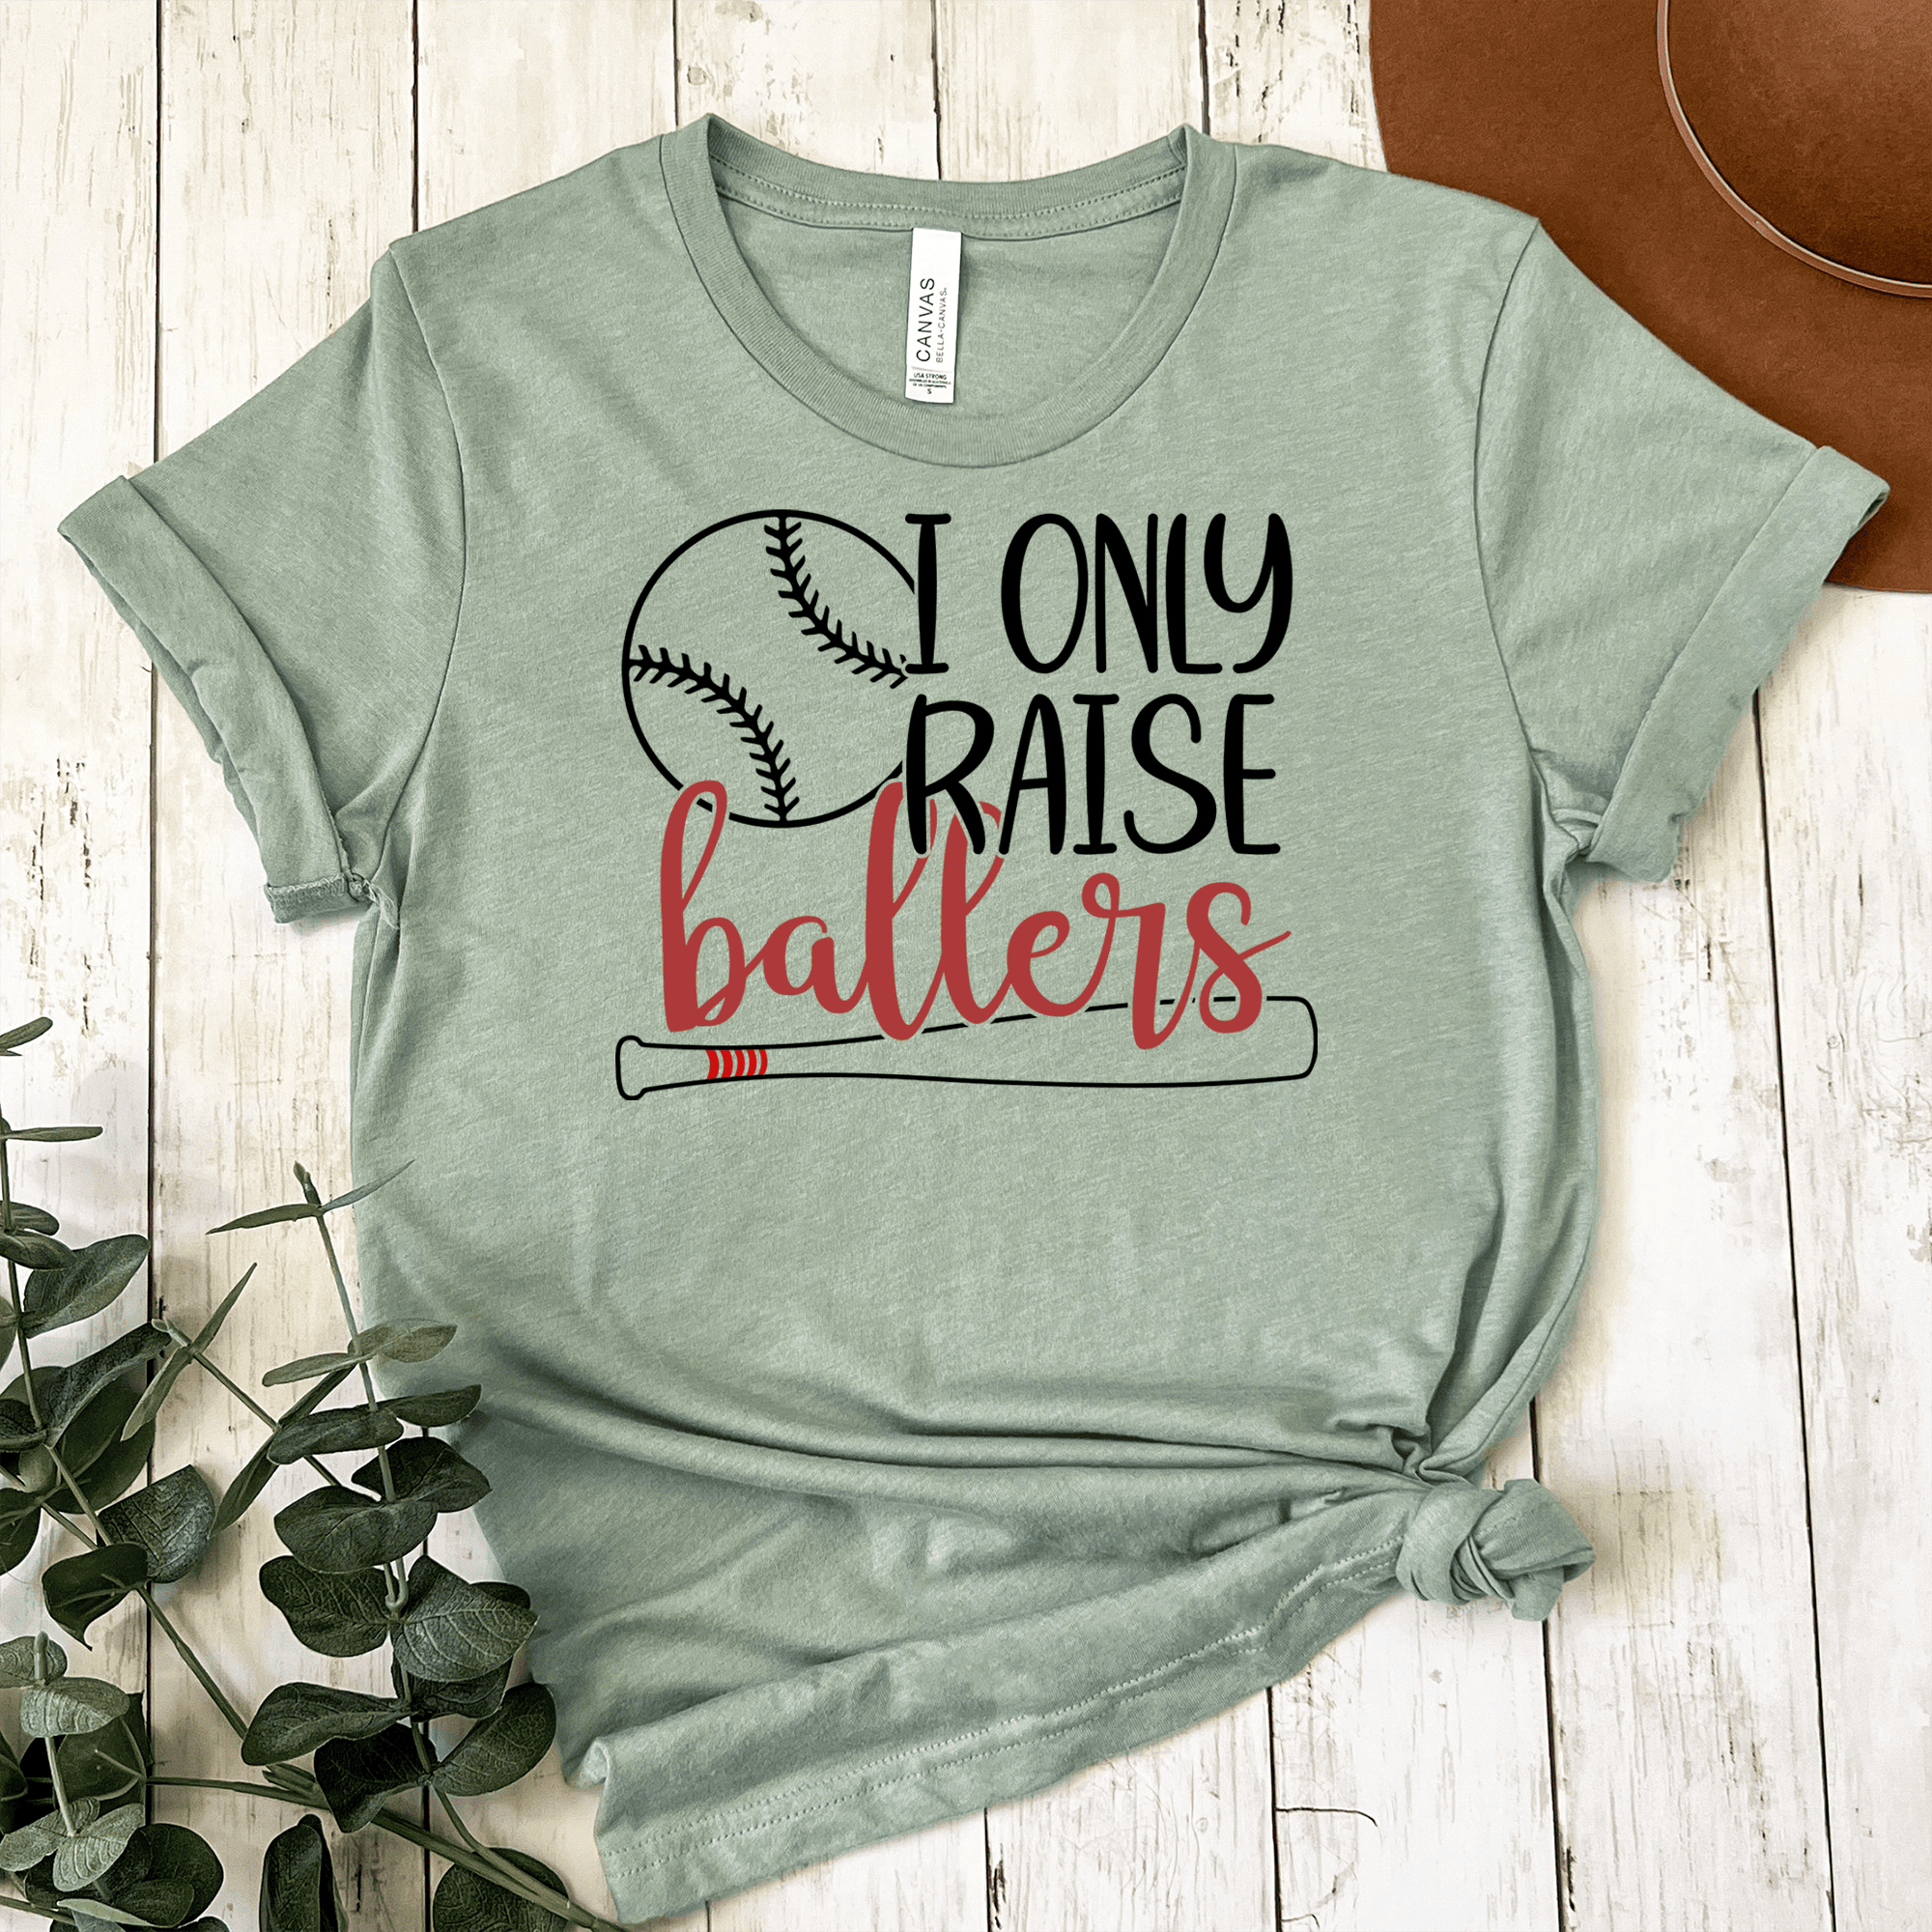 Womens Light Green T Shirt with I-Only-Raise-Ballers design